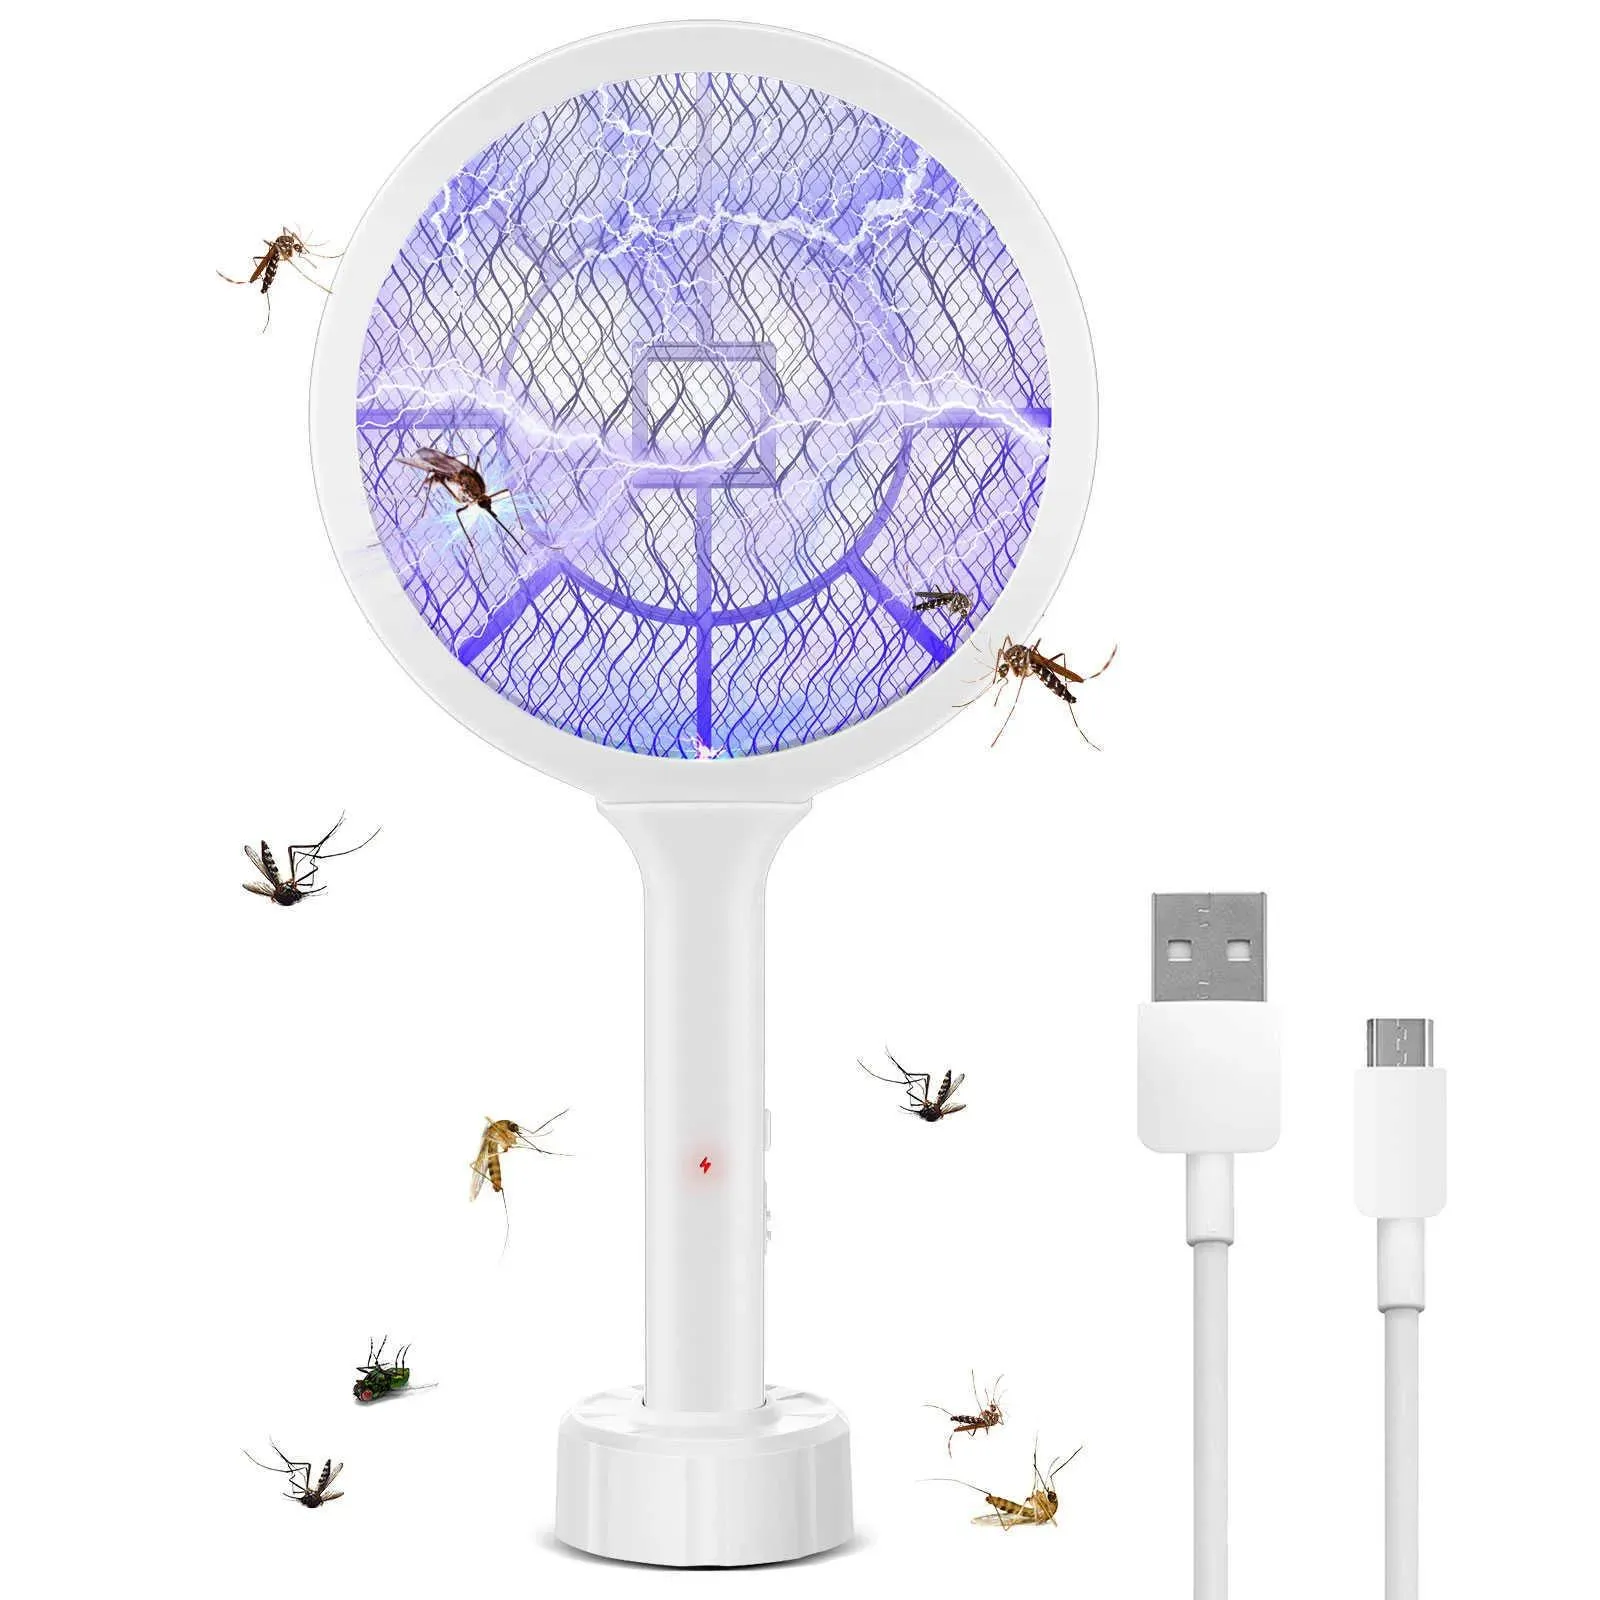 Control Pest Control Professional Mosquito Killer Bat USB Rechargeable Electric Racket Kills Mosquitoes Insect Moth Fly Repellent Bug Zapp